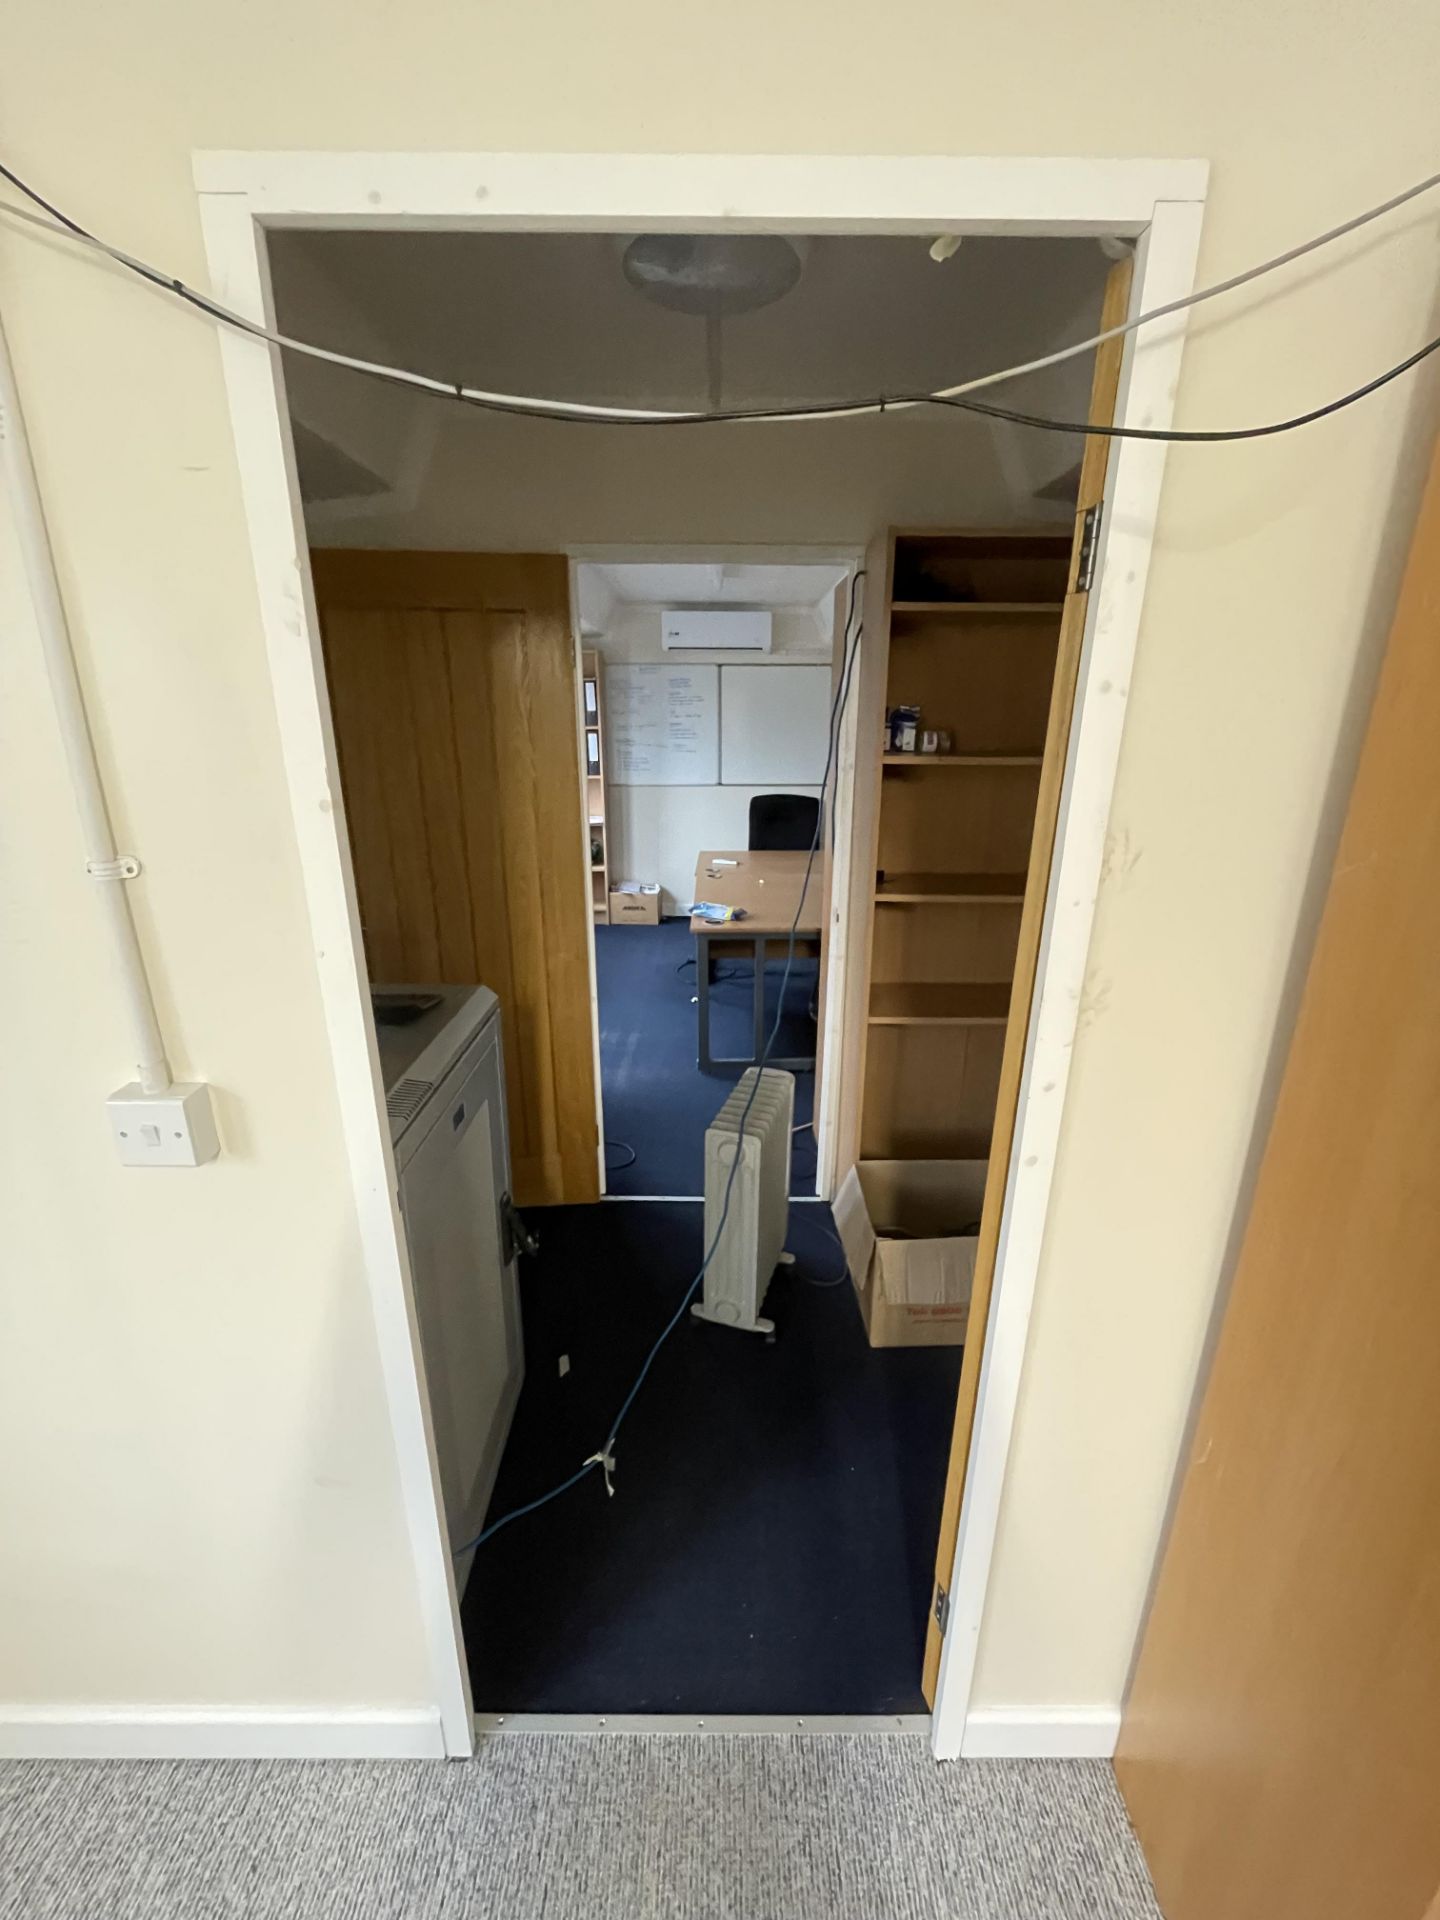 Marine Pod Cabin Office, Internal Measurements: 10.5x3.4x2.4m, Wired and Fitted with 2x Chigo MFR- - Image 8 of 13